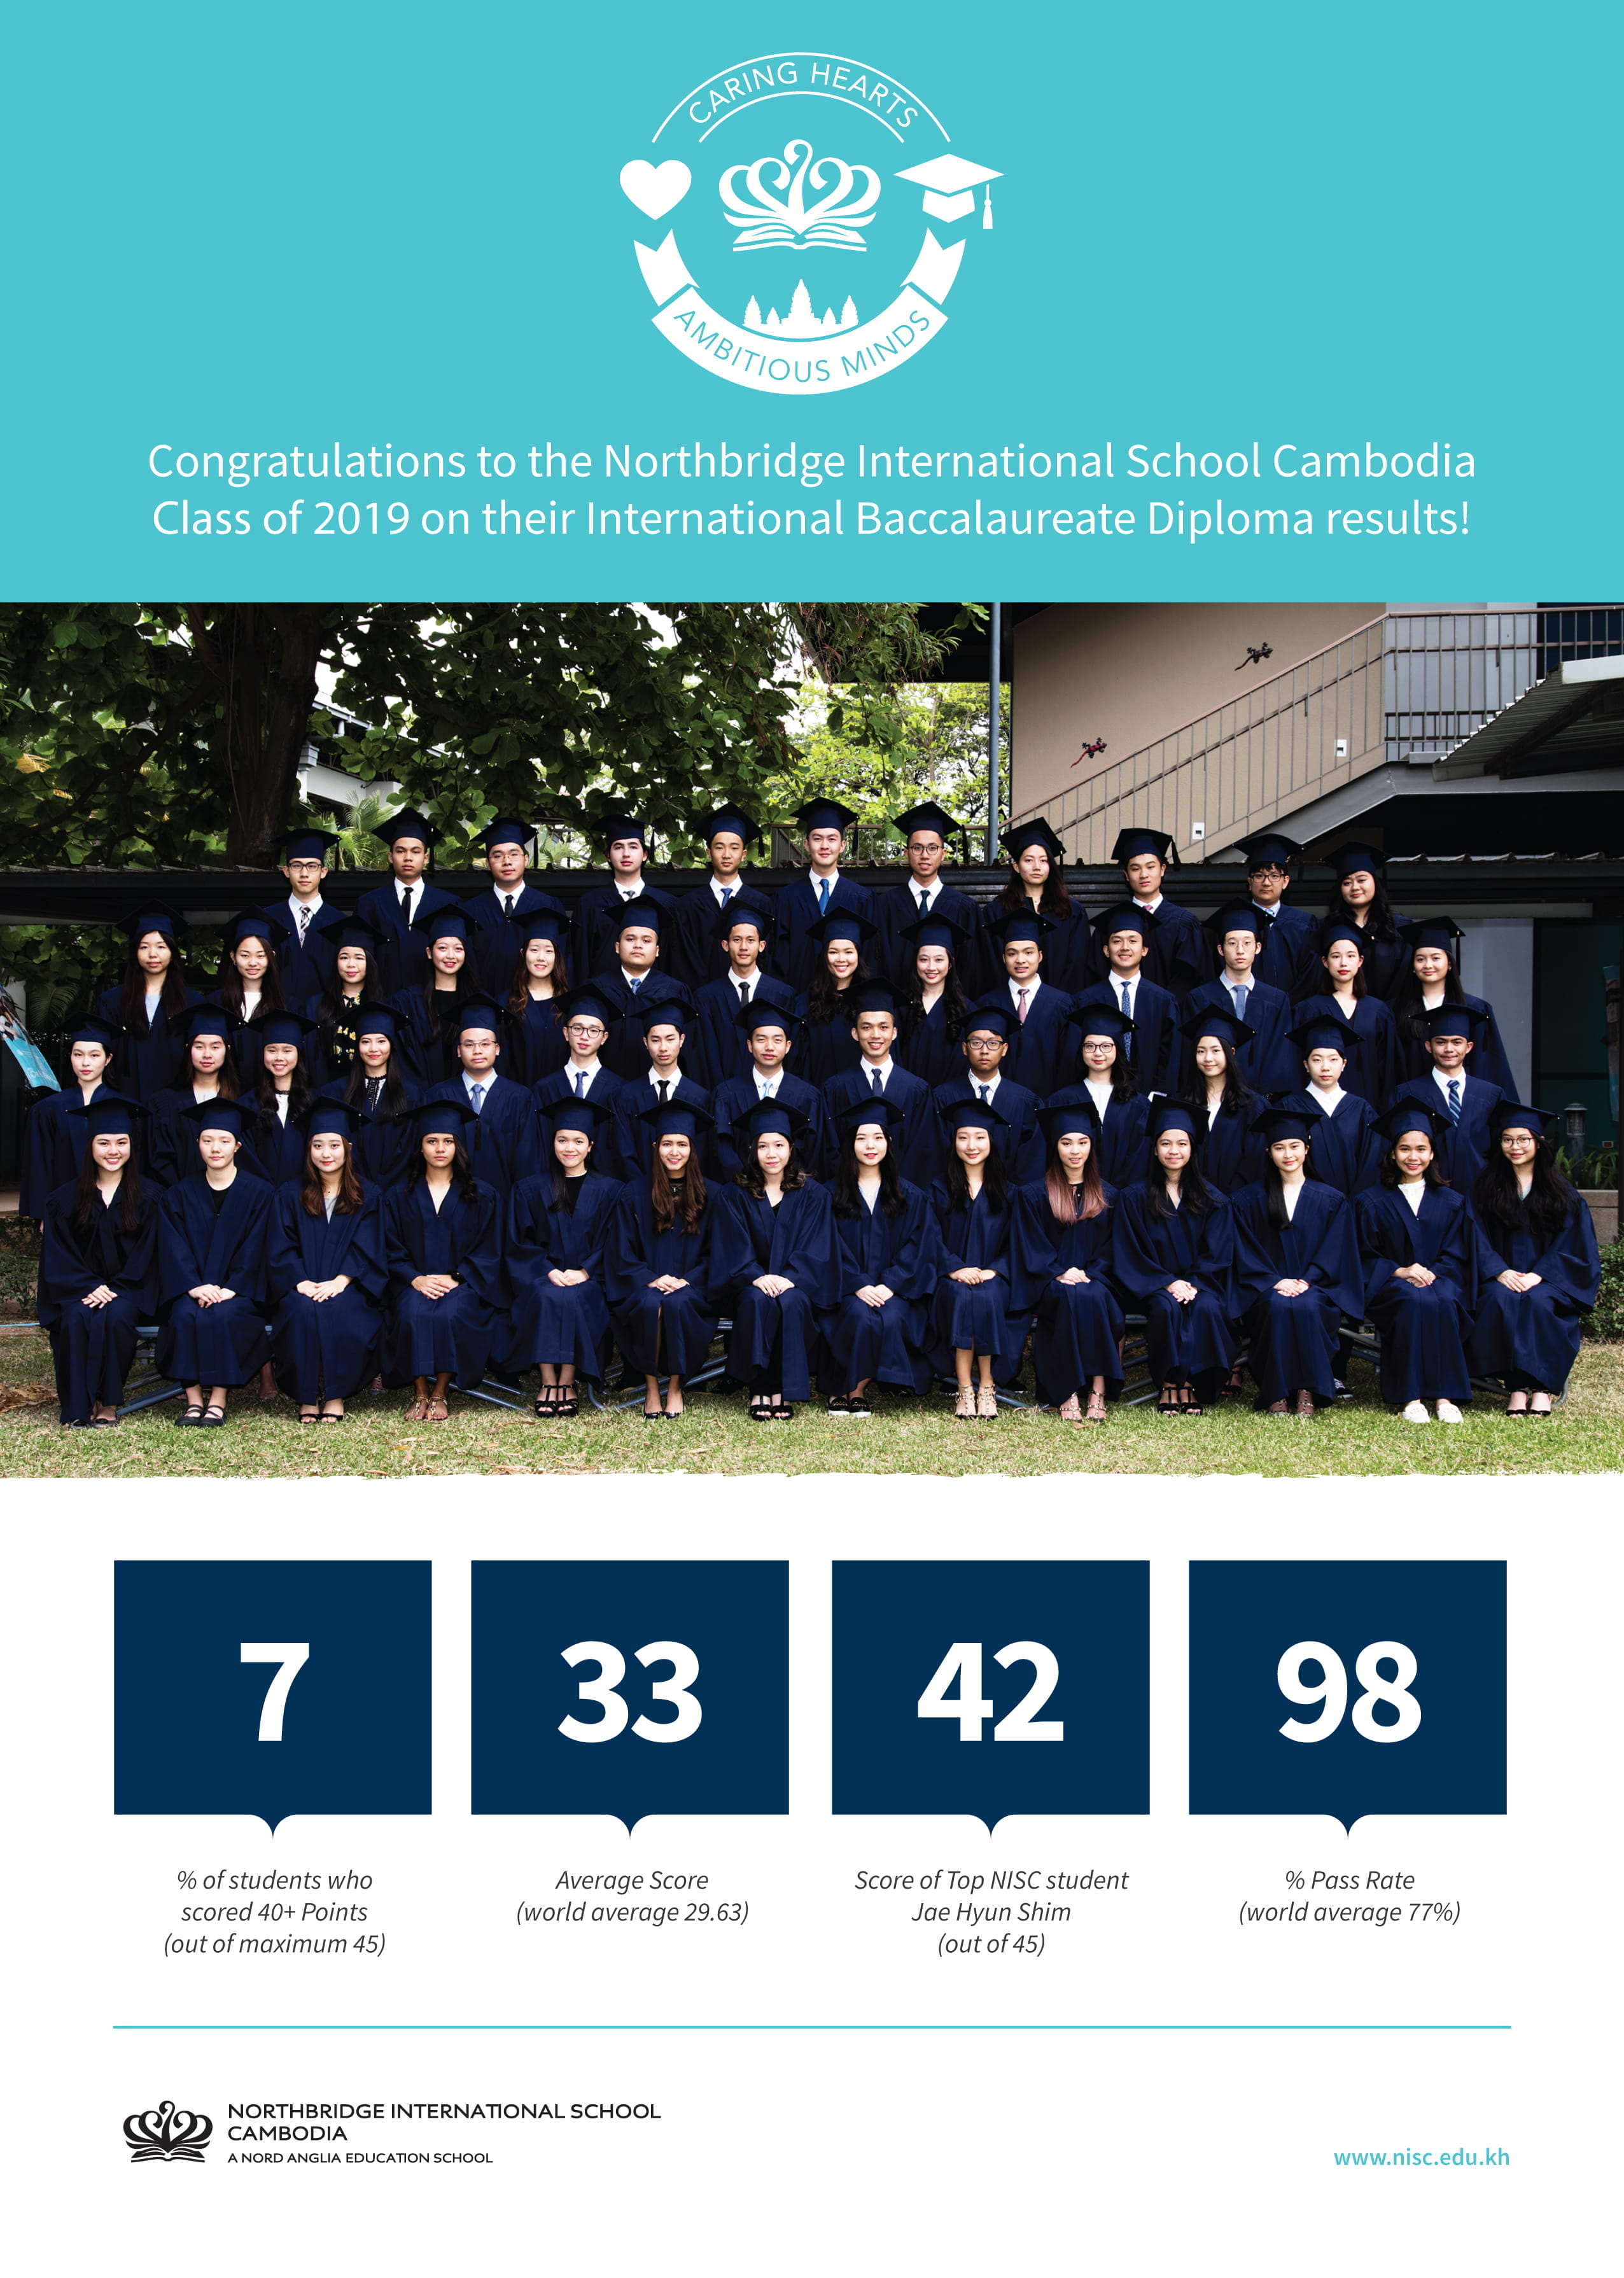 Outstanding IB Diploma results achieved by Northbridge students for 2018/19 academic year-outstanding-ib-diploma-results-achieved-by-northbridge-students-for-201819-academic-year-IB result_NISC_20190101